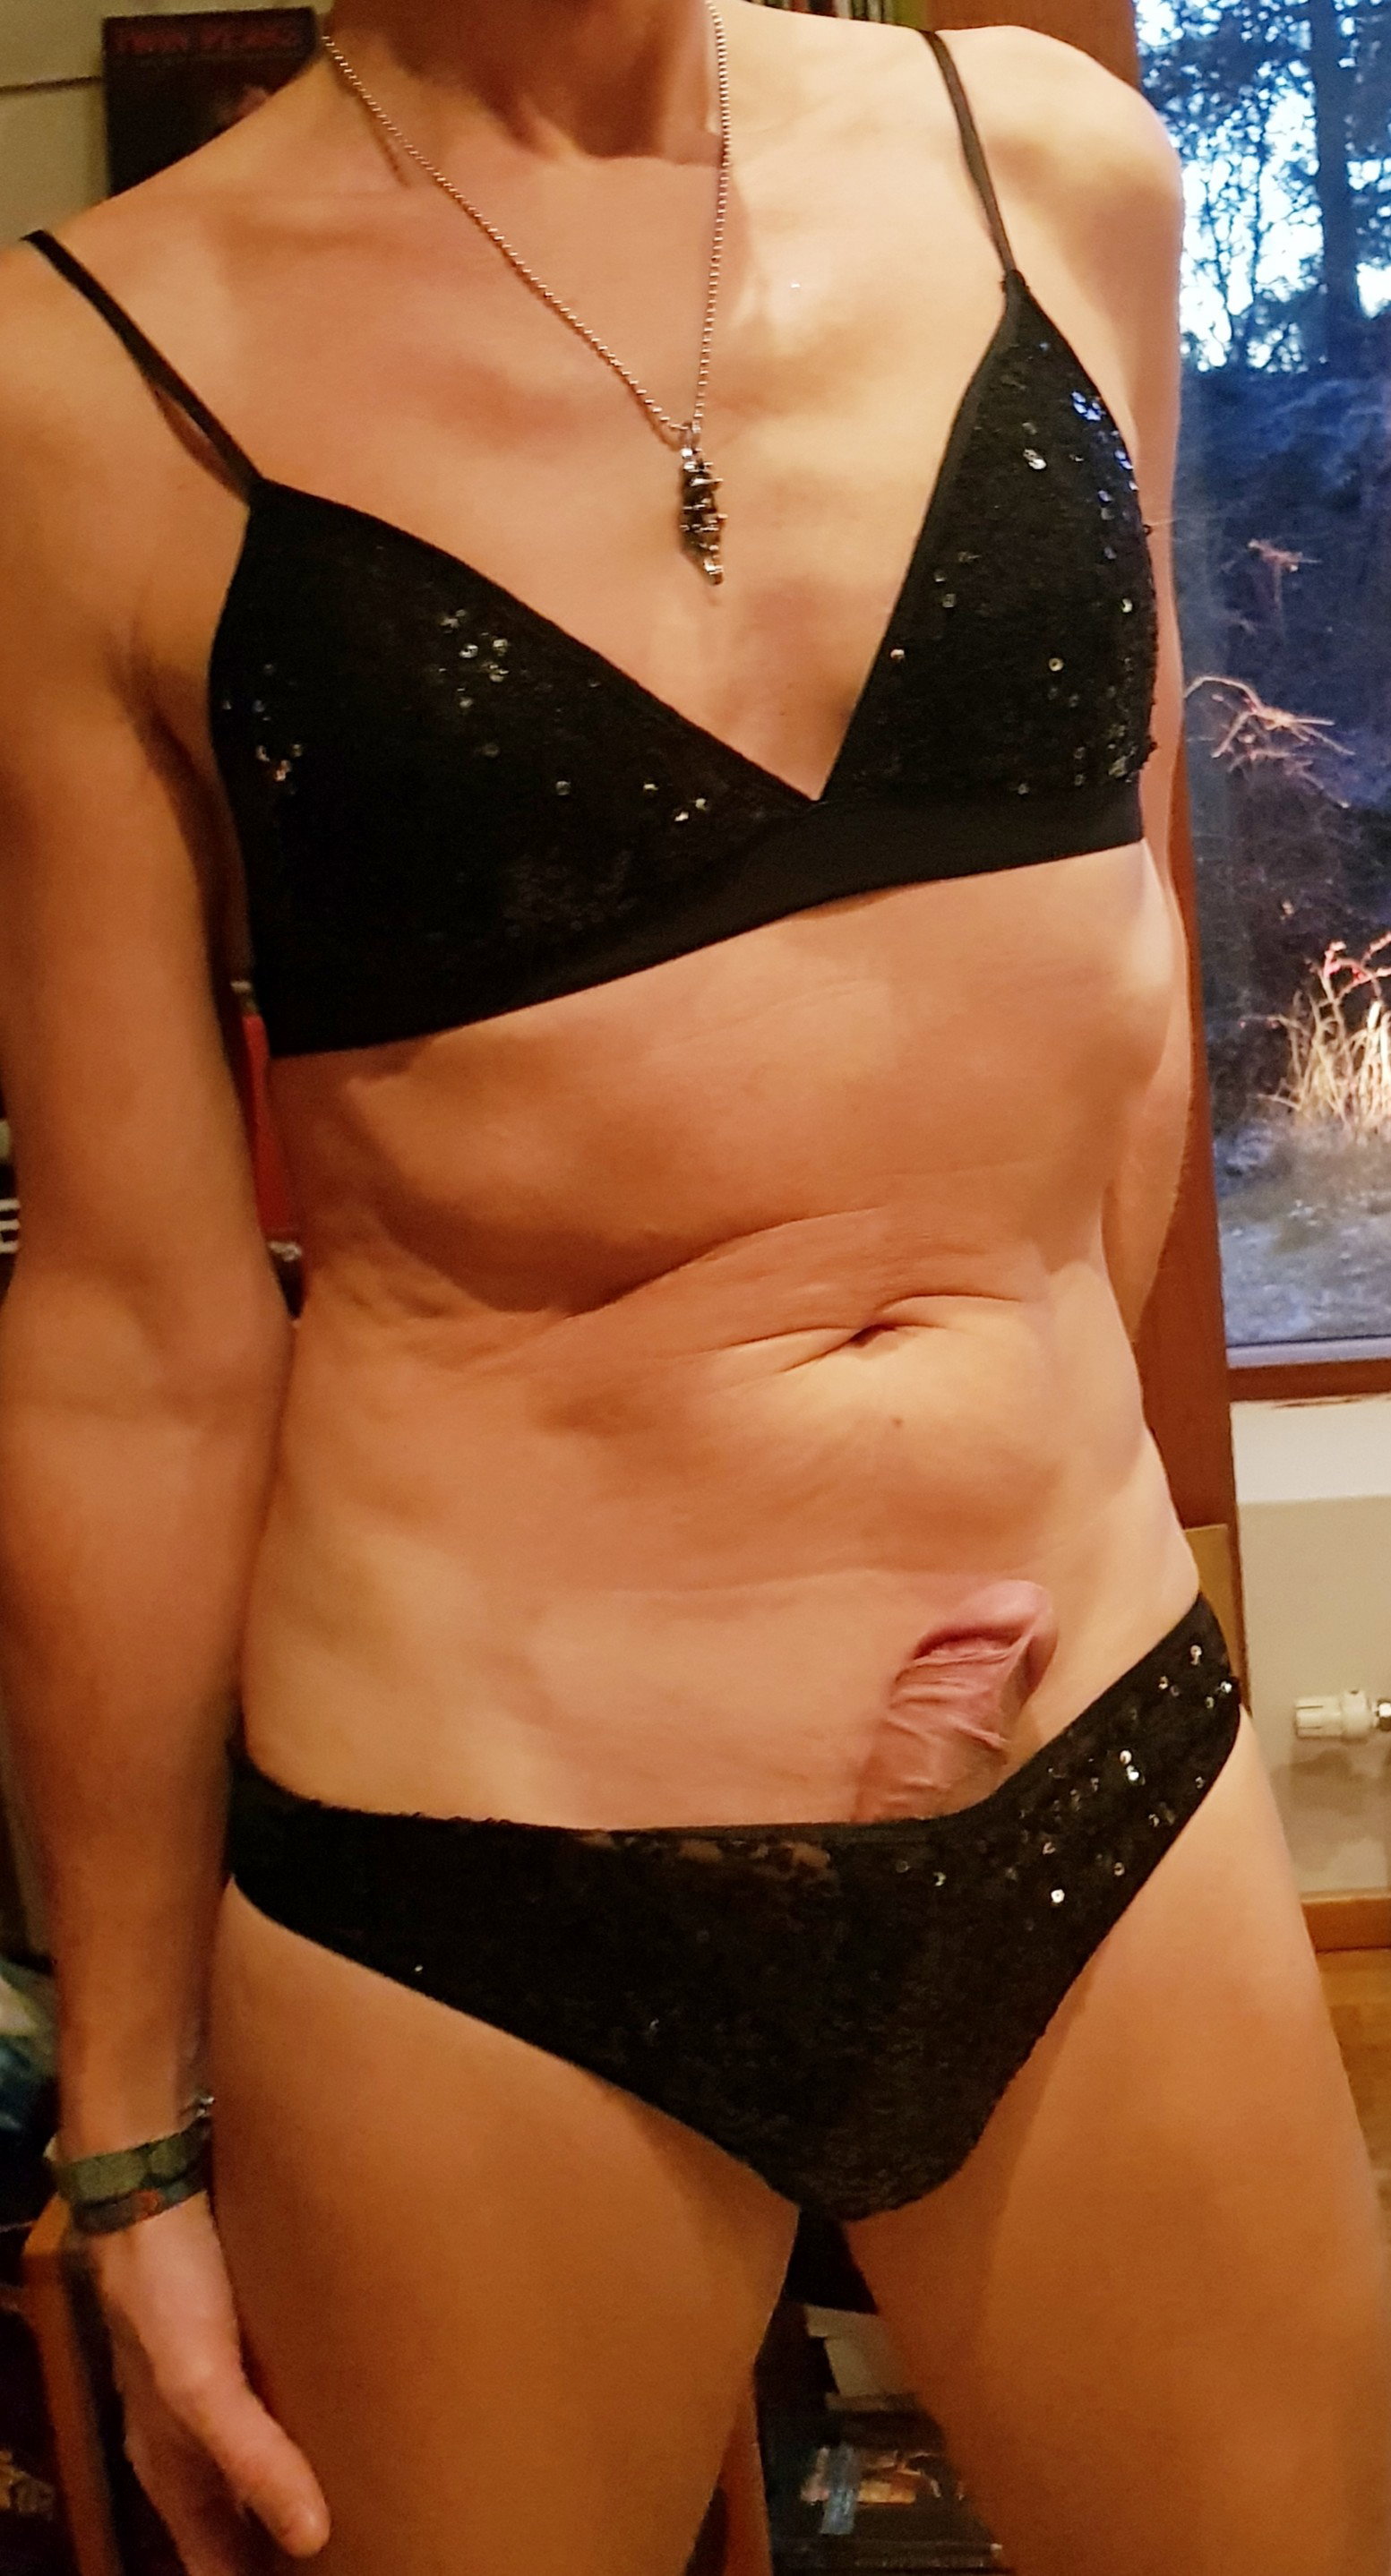 Watch the Photo by Crossdresslingerie with the username @Crossdresslingerie, who is a verified user, posted on March 31, 2019. The post is about the topic Crossdressing lingerie. and the text says 'Glitter lingerie 😊

#crossdress#crossdresser#me#crossdressing#2018#sissy#kinkycouple#wolford#domination#sissy training#kinky couple#male submission#sissified'